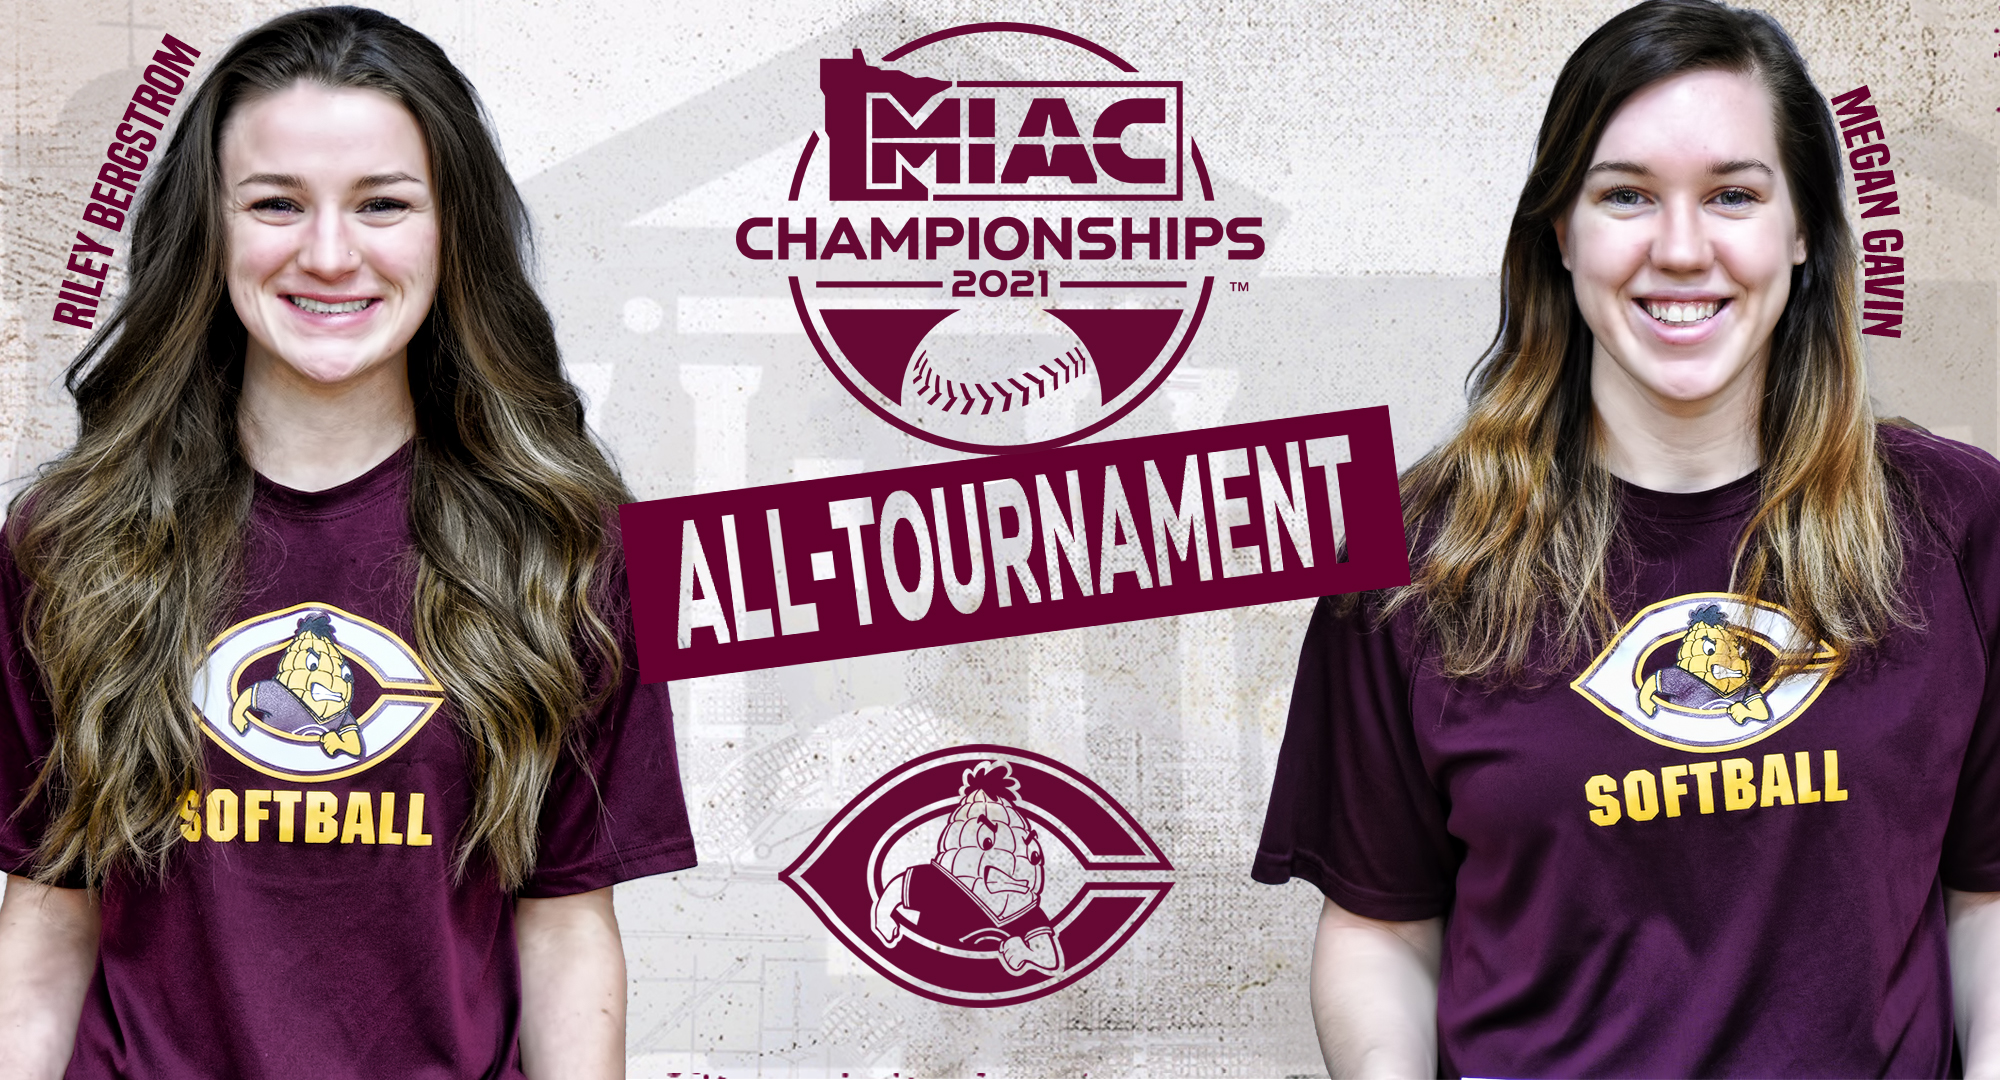 Riley Bergstrom and Megan Gavin were named to the MIAC All-Tournament Team after helping the Cobbers’ to their first-ever postseason berth and playoff win.